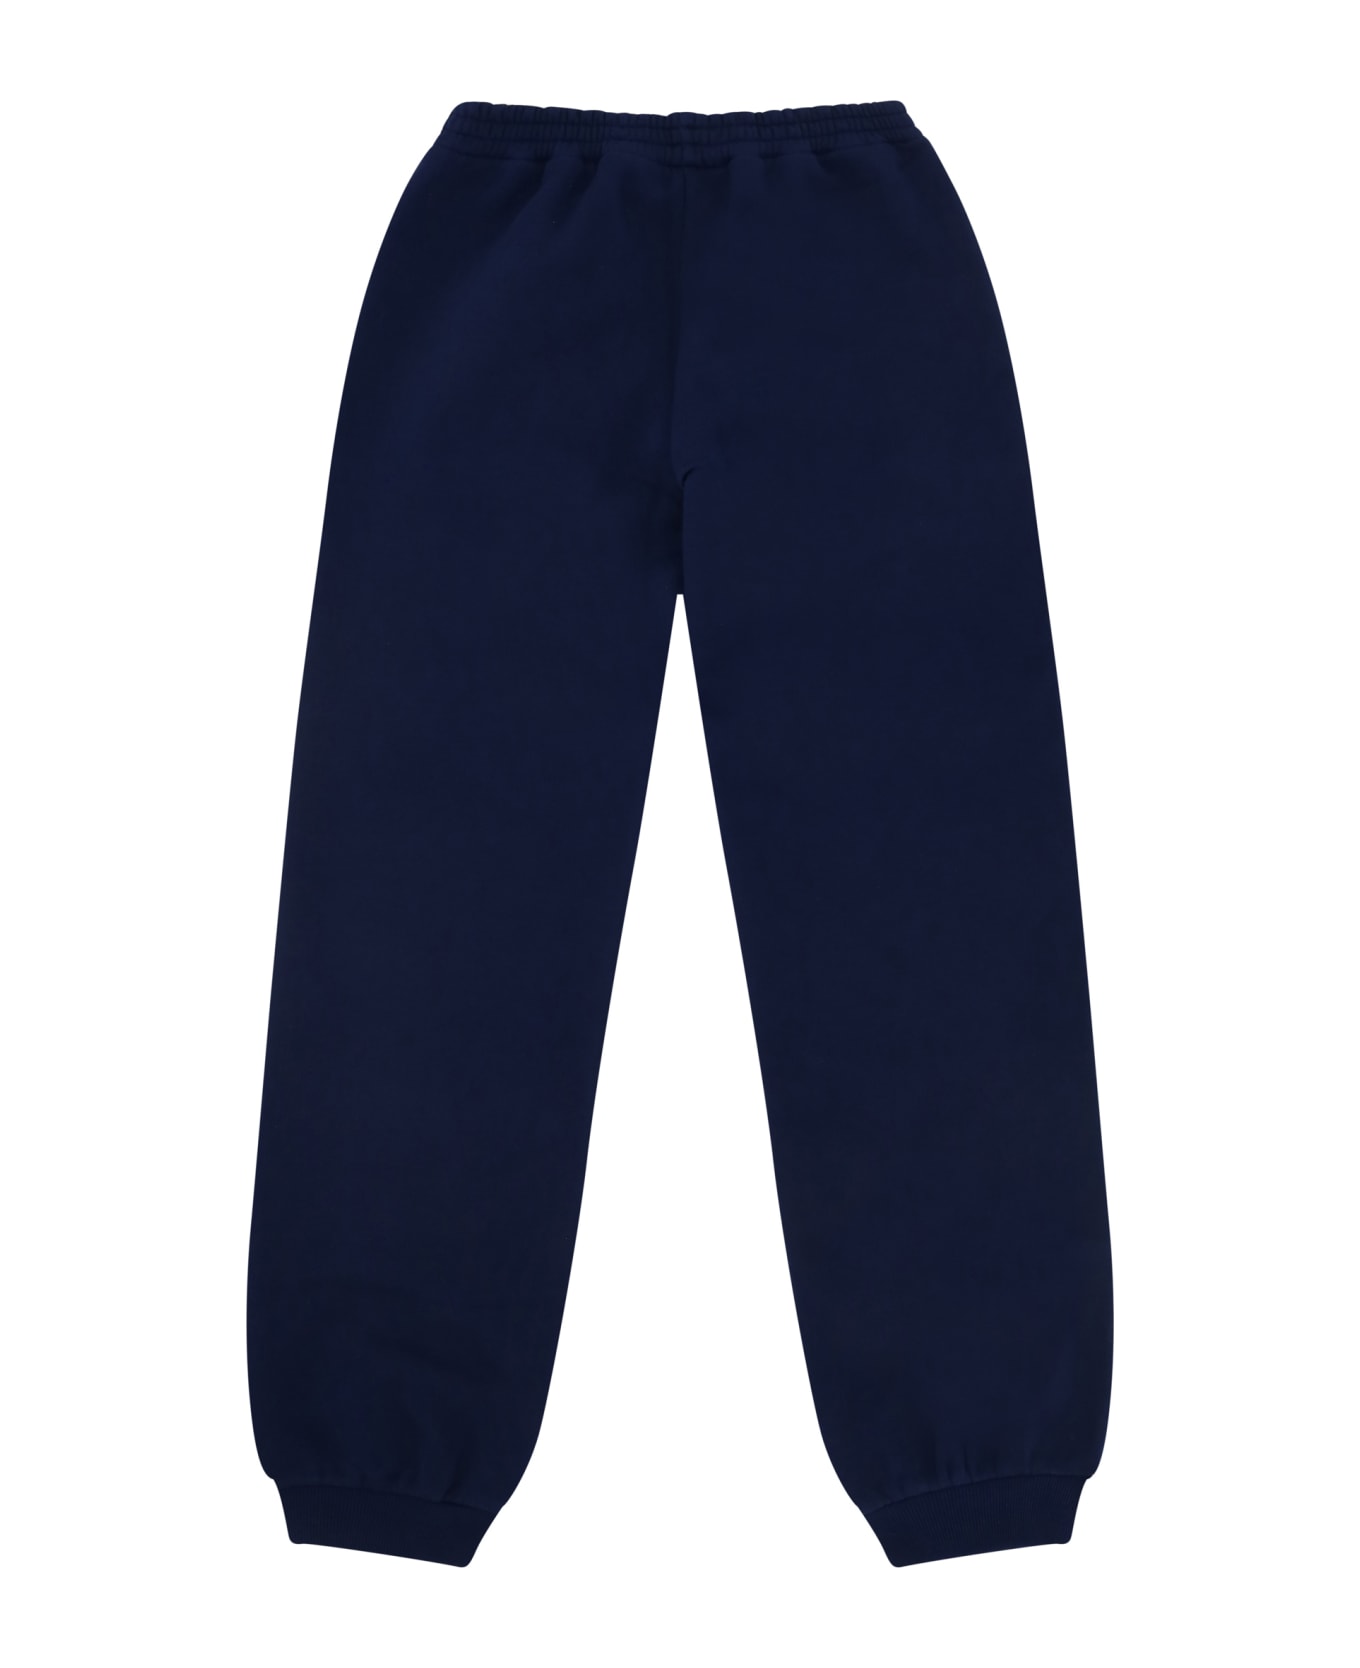 Gucci Pants For Boy - Blue ボトムス